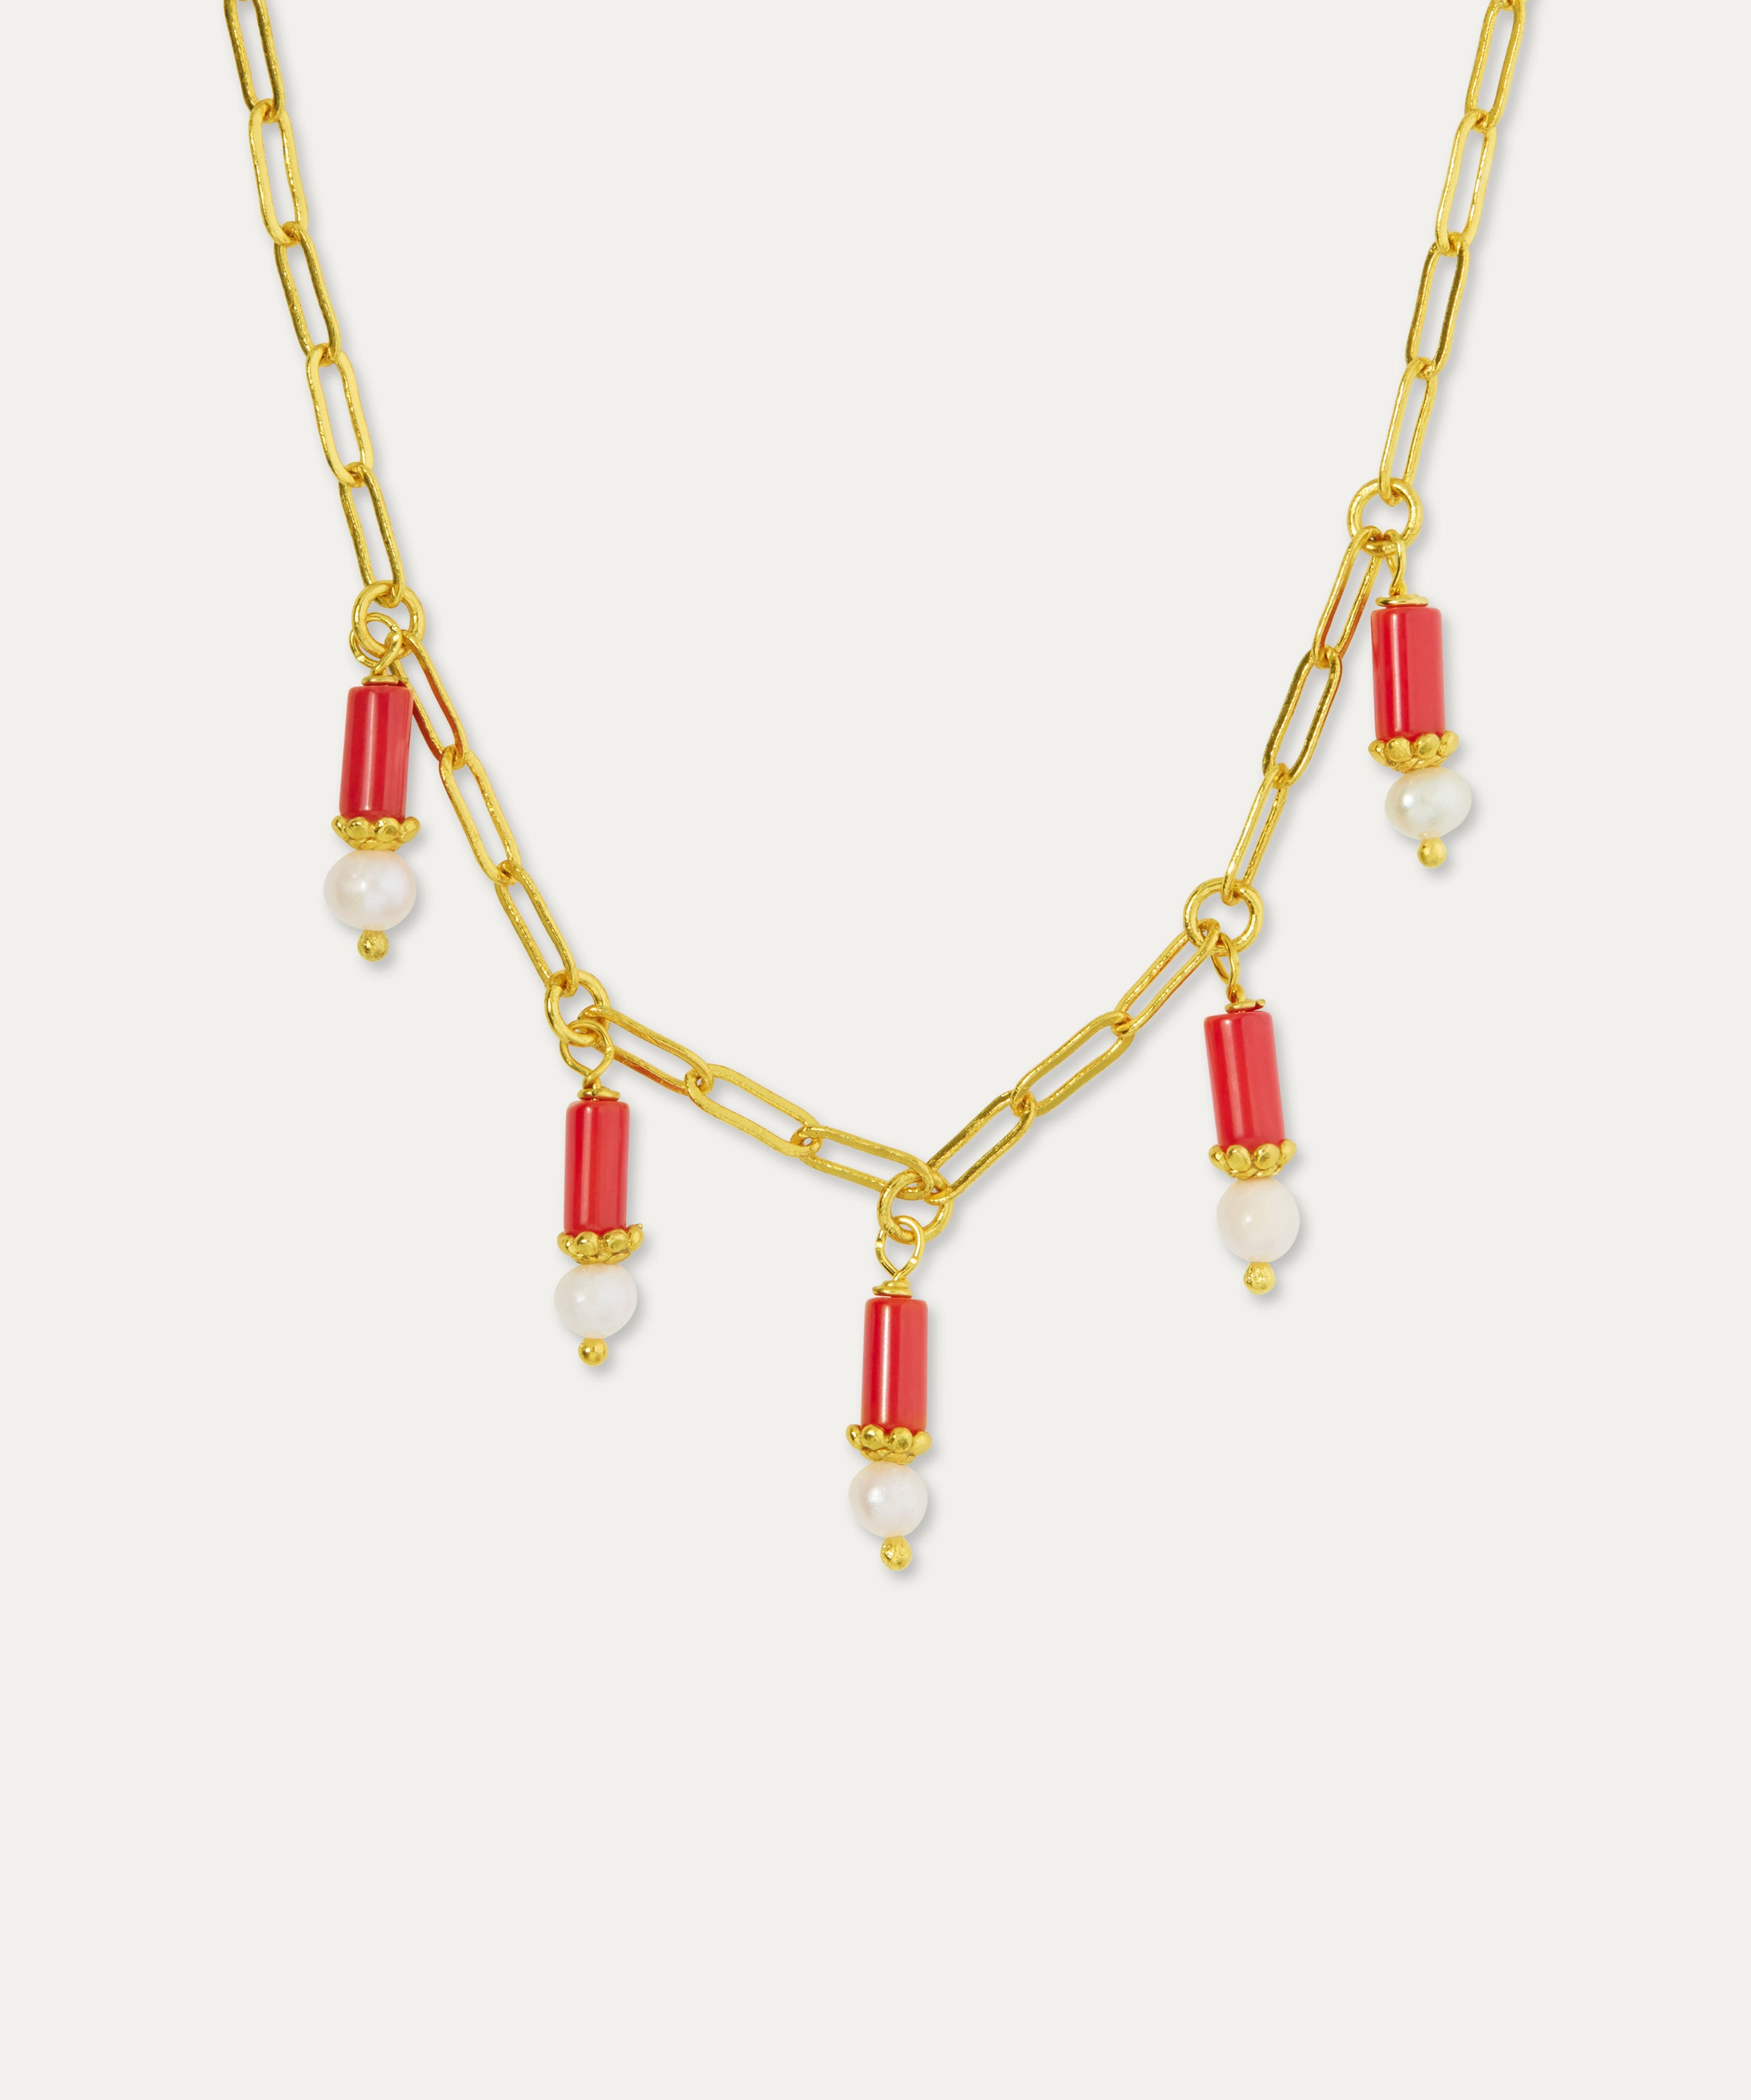 Scarlett Pearl Chain Necklace | Sustainable Jewellery by Ottoman Hands